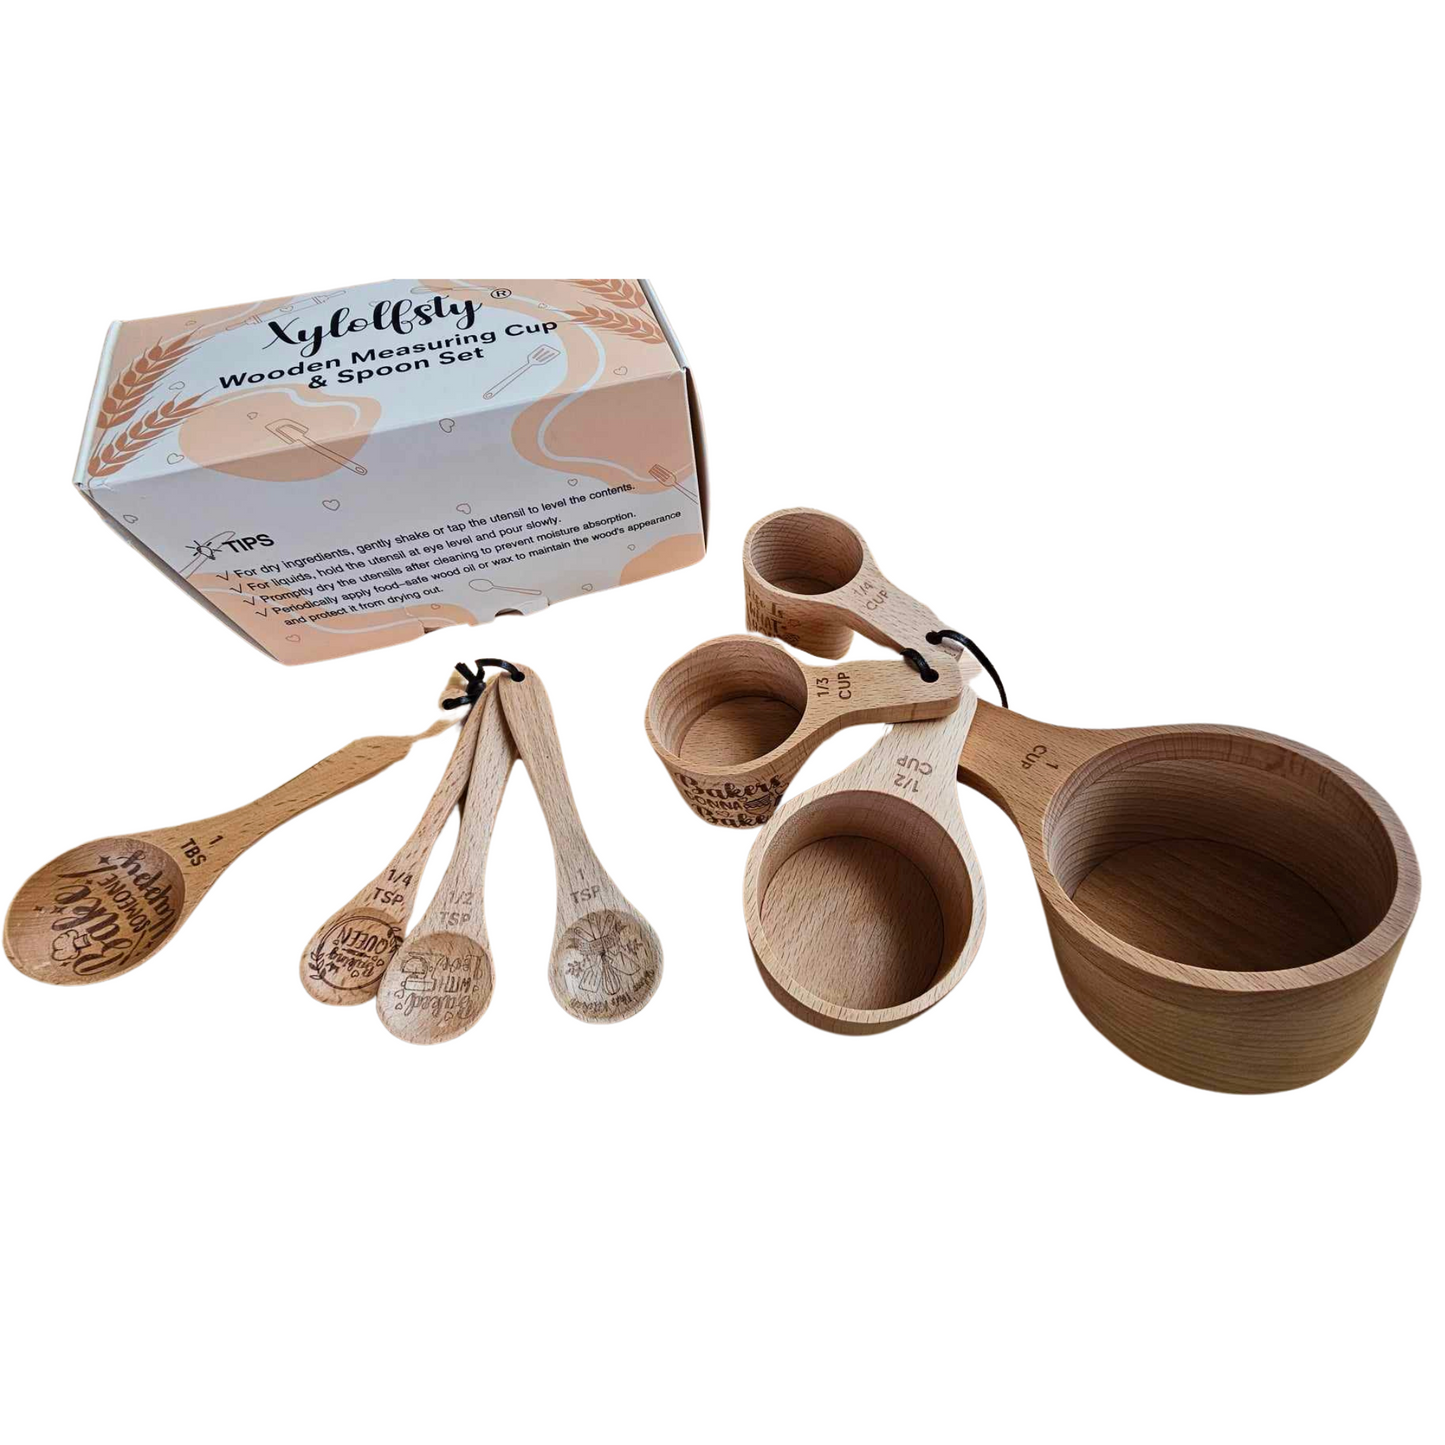 Wooden Measuring Cup and Spoon Set